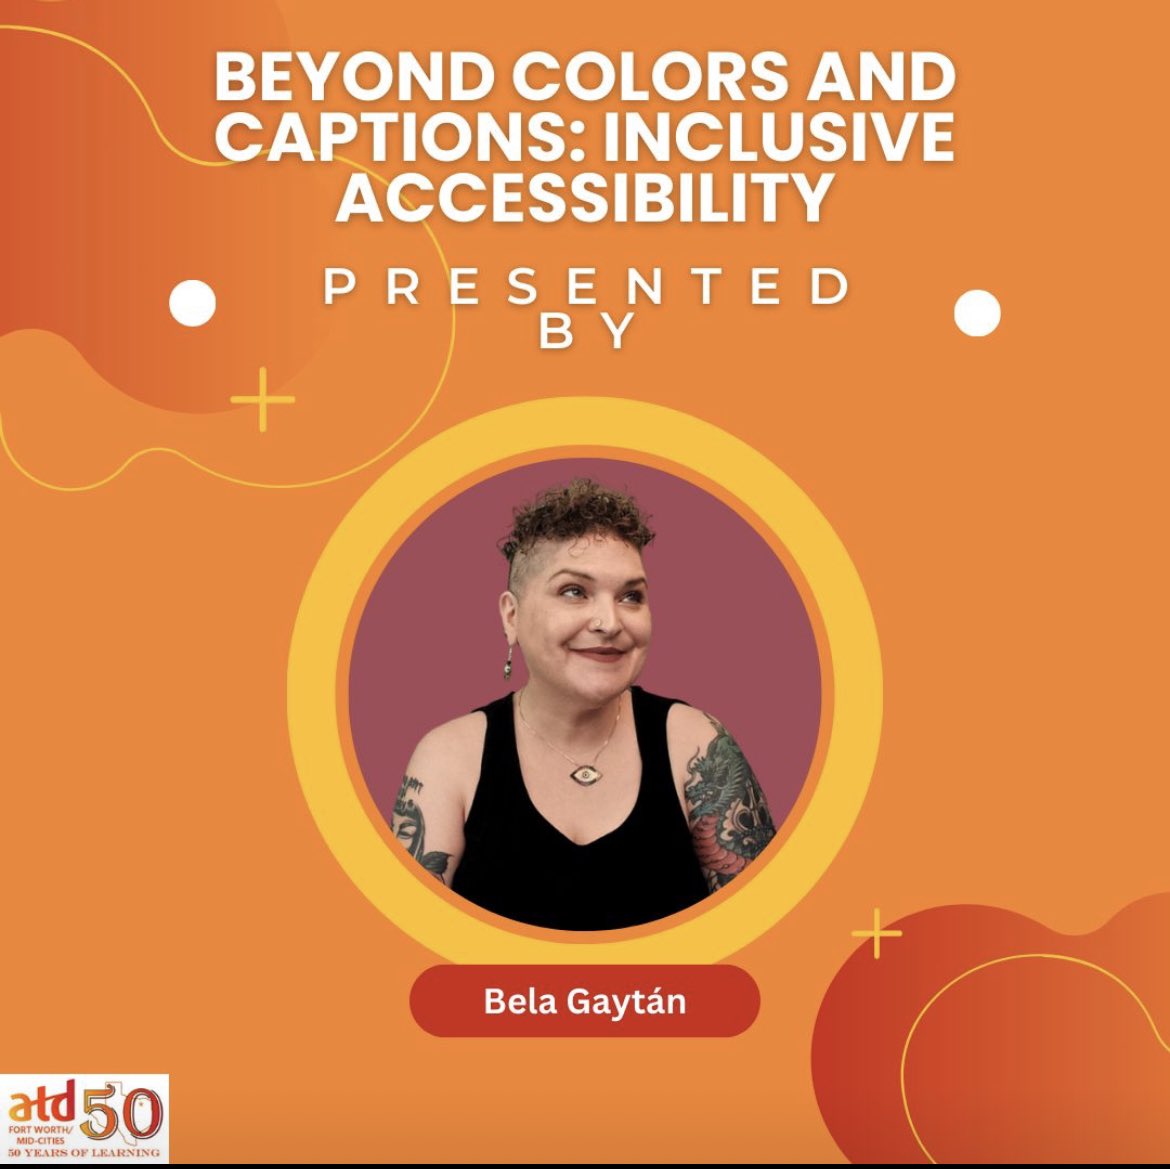 The learning continues with #ATDFW! Come learn with us as Bela Gaytán, M.Ed. presents, Beyond Colors and Captions: Inclusive Accessibility on Thursday, February 29th! lnkd.in/gxv5yCi3 #ATDFW #alwayslearning #learninganddevelopment